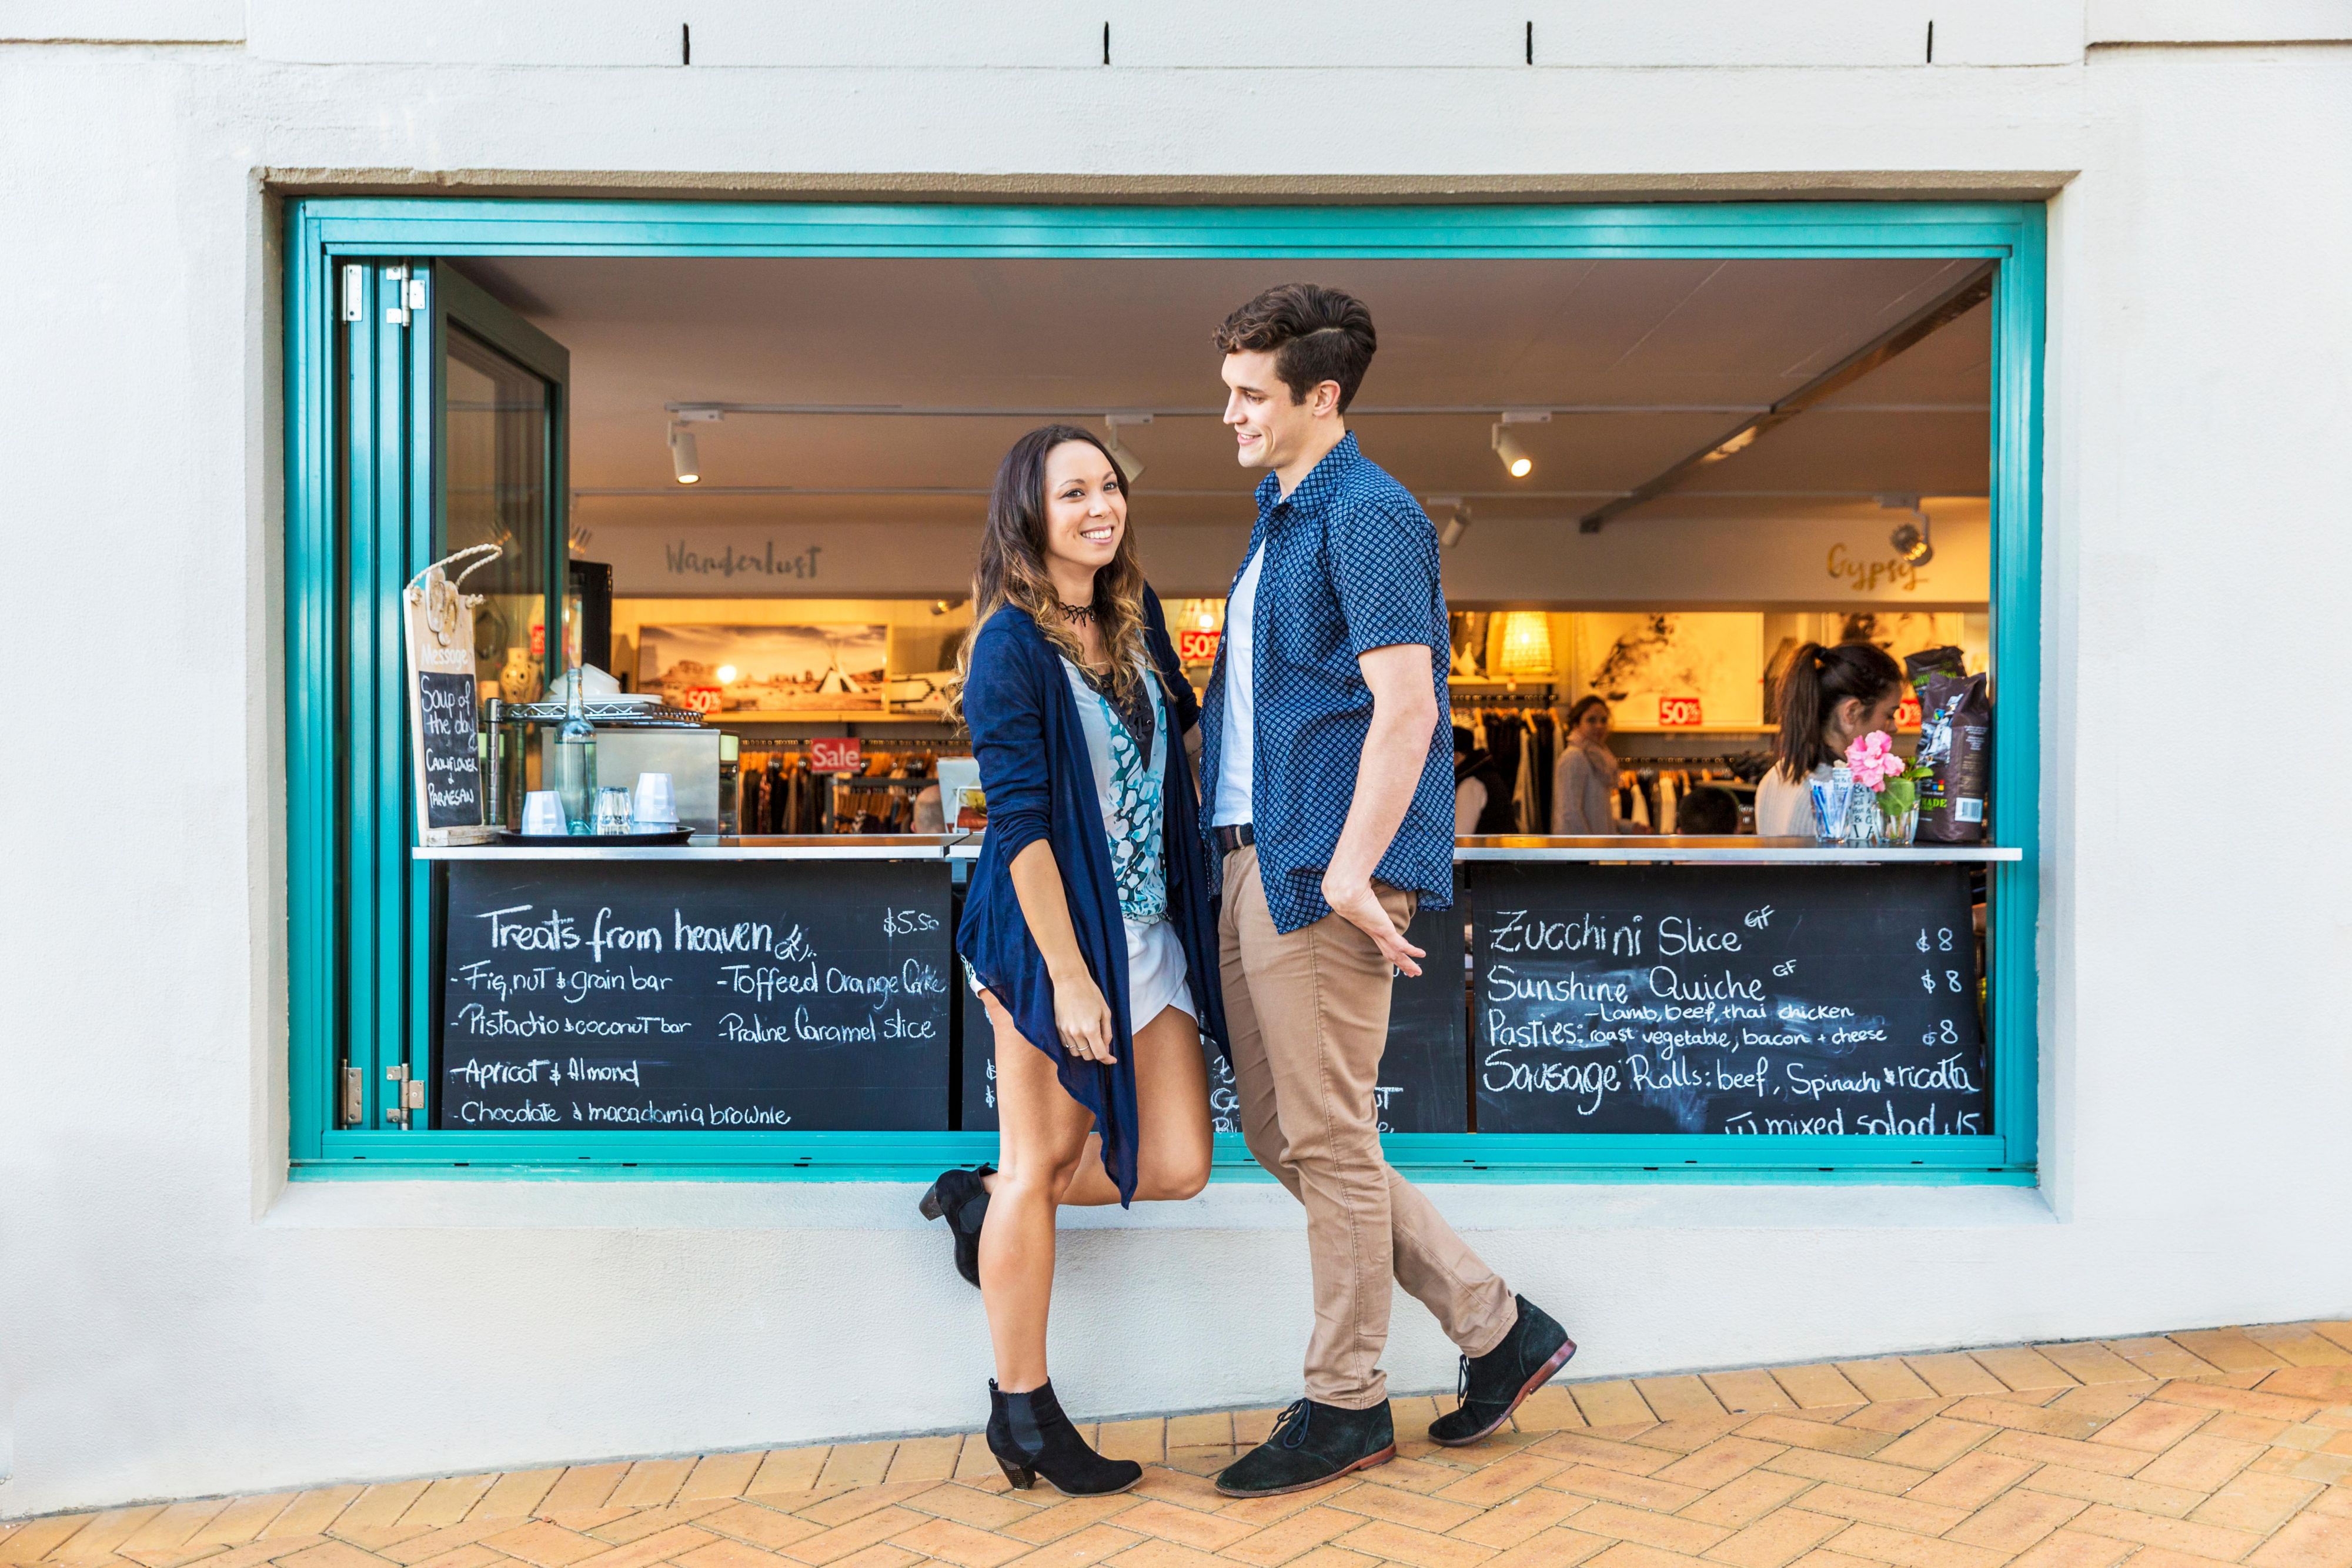 Enjoy local cafes and restaurants in Coogee Village